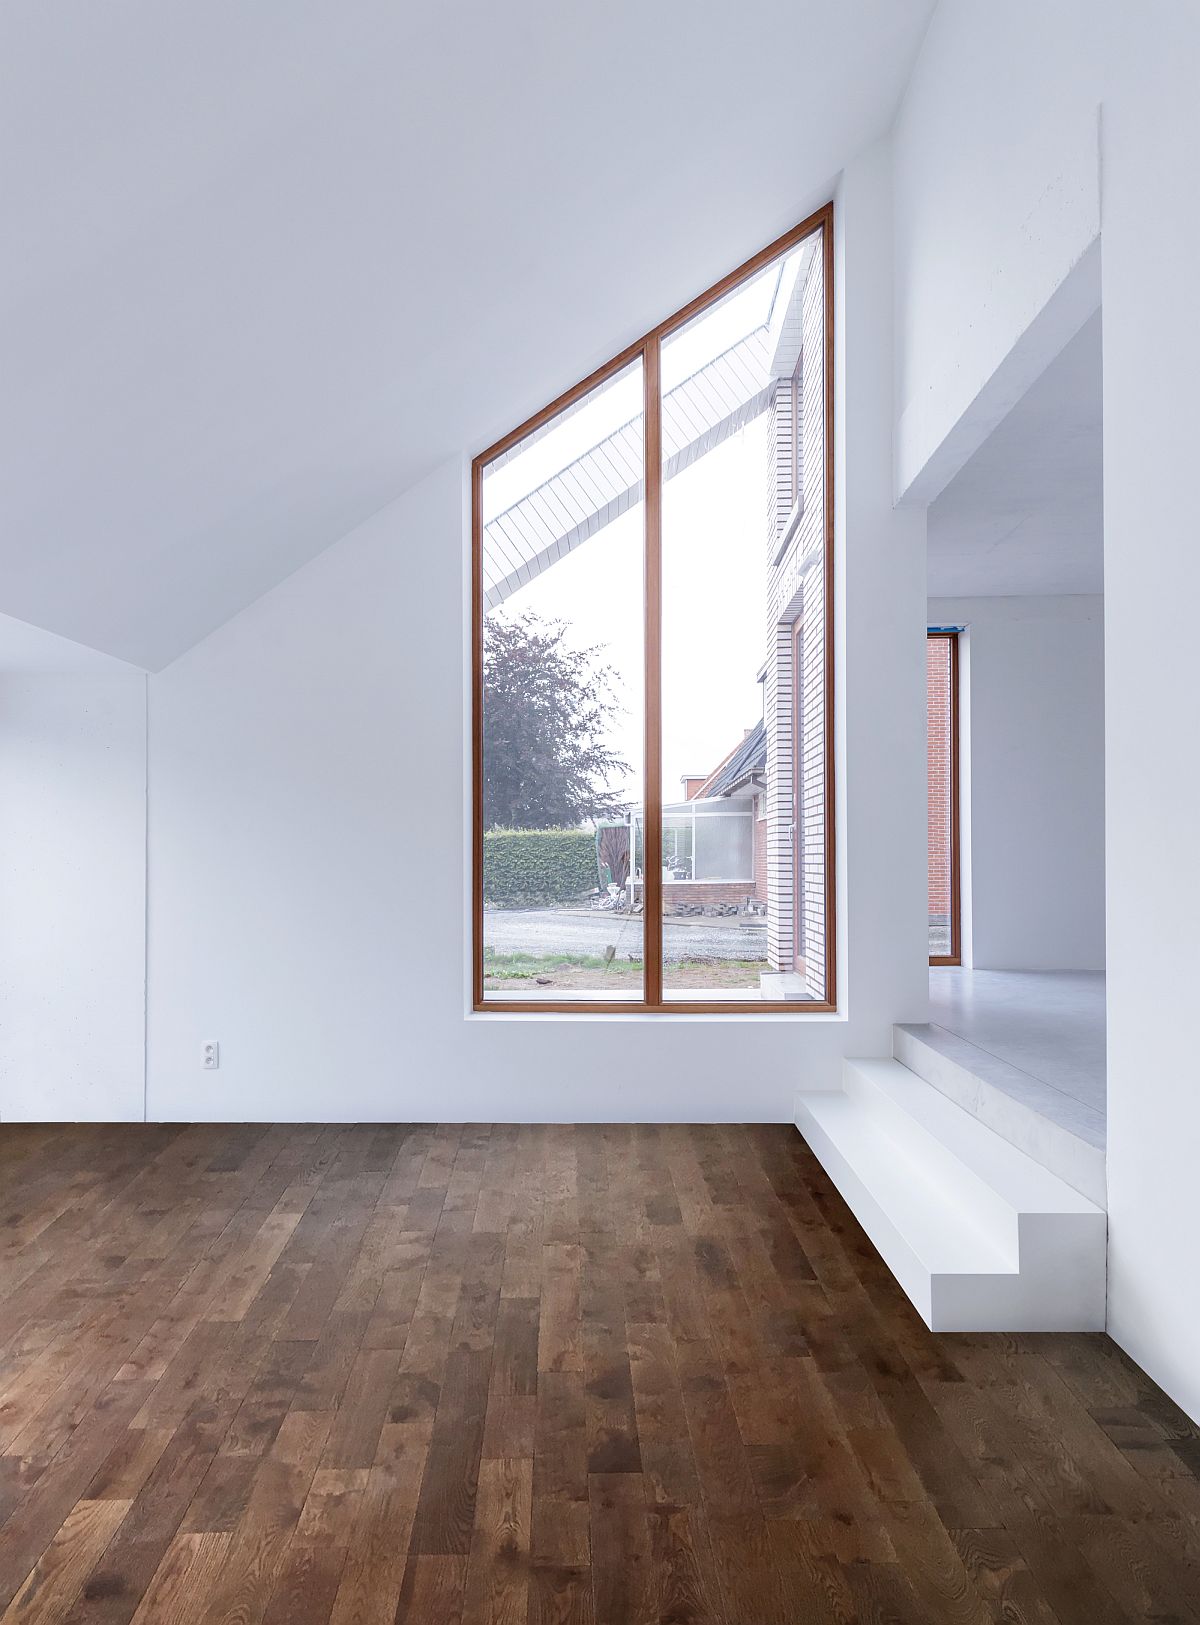 Slanting form of the roof is complemented by the shape of the window frame